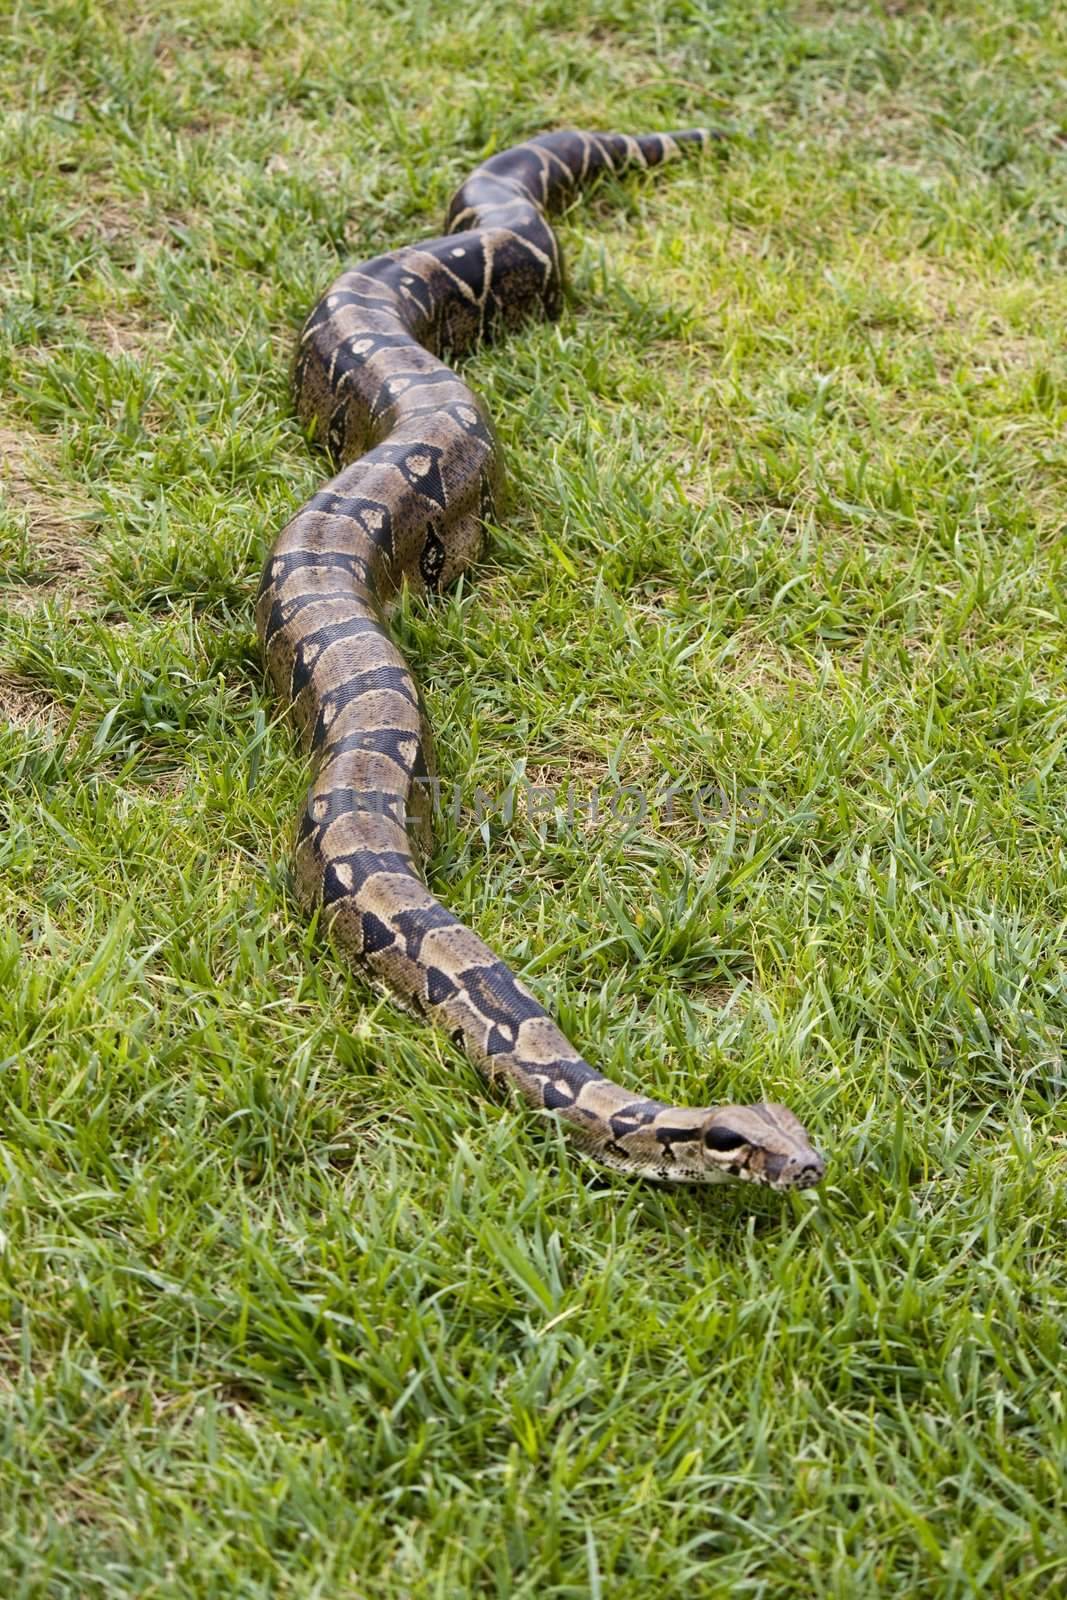 Full body view of a boa constrictor on the grass.